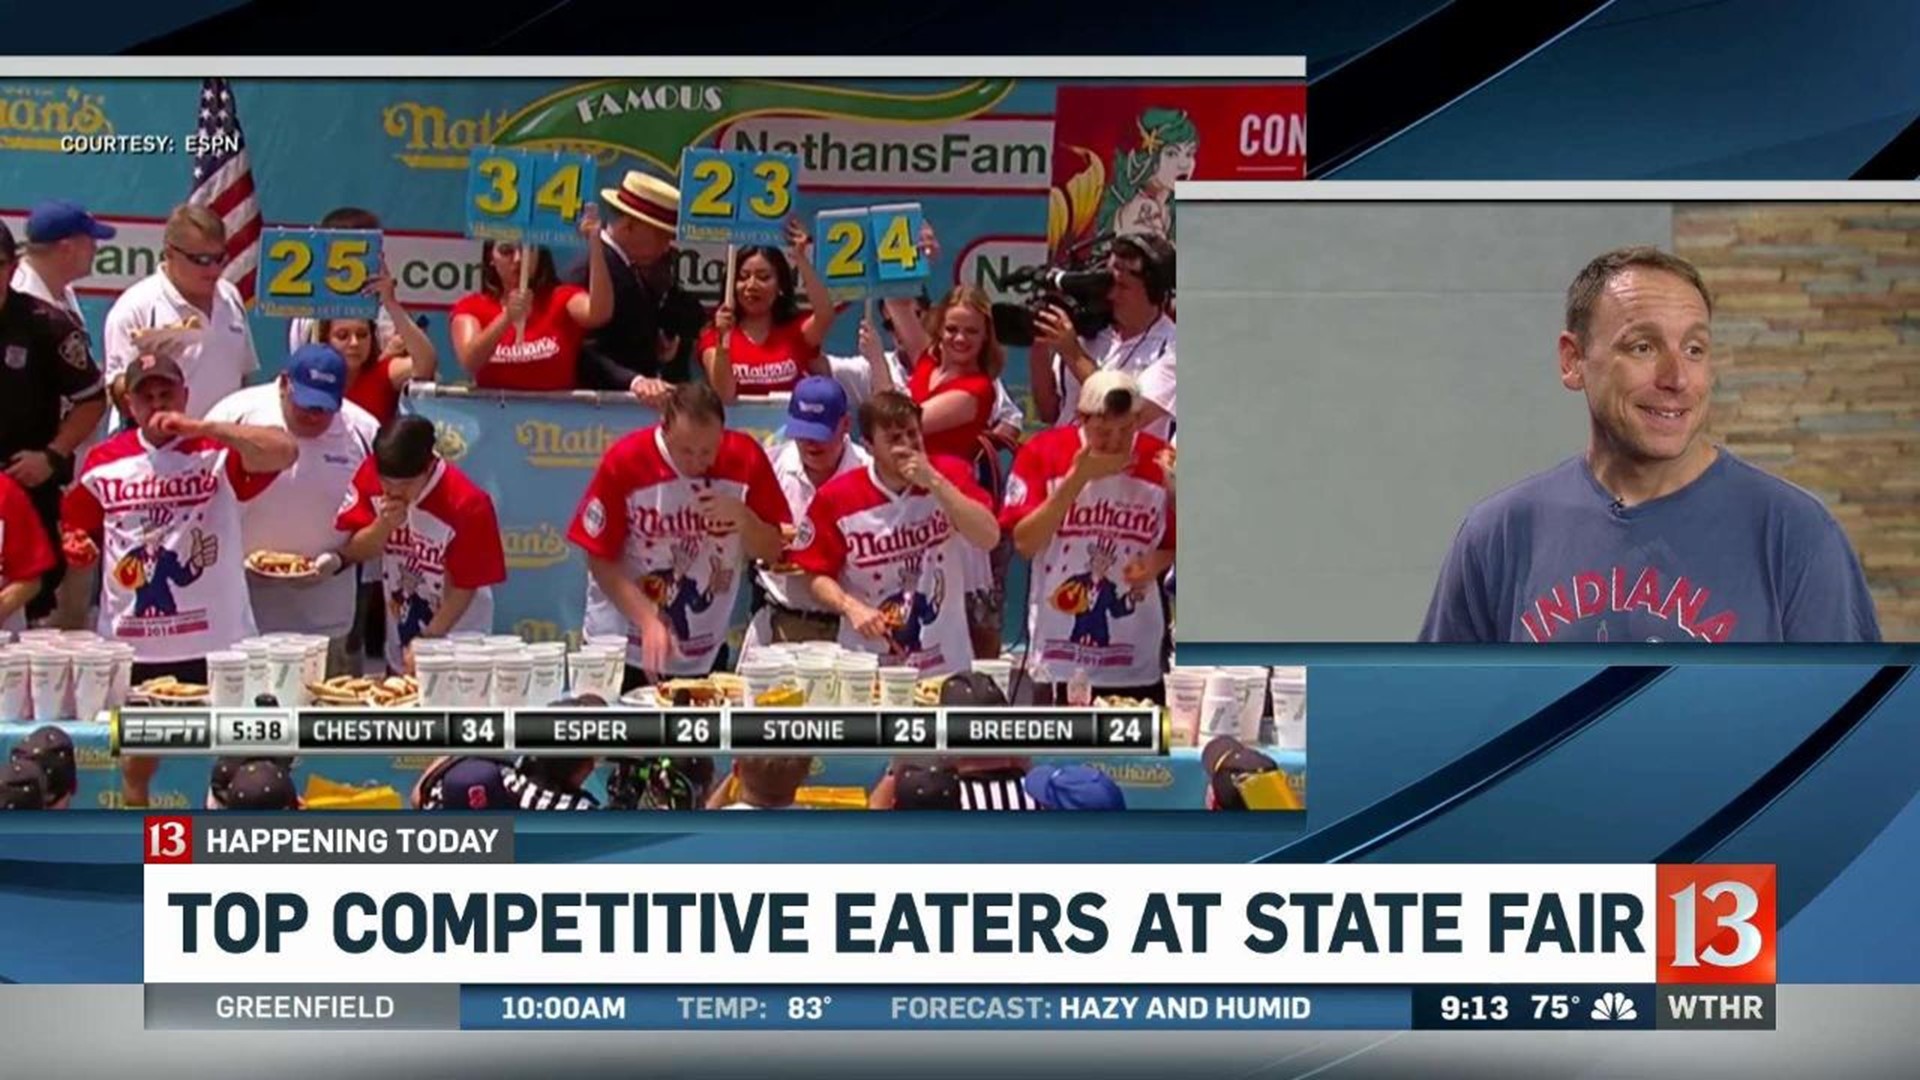 Joey Chestnut gets ready to eat